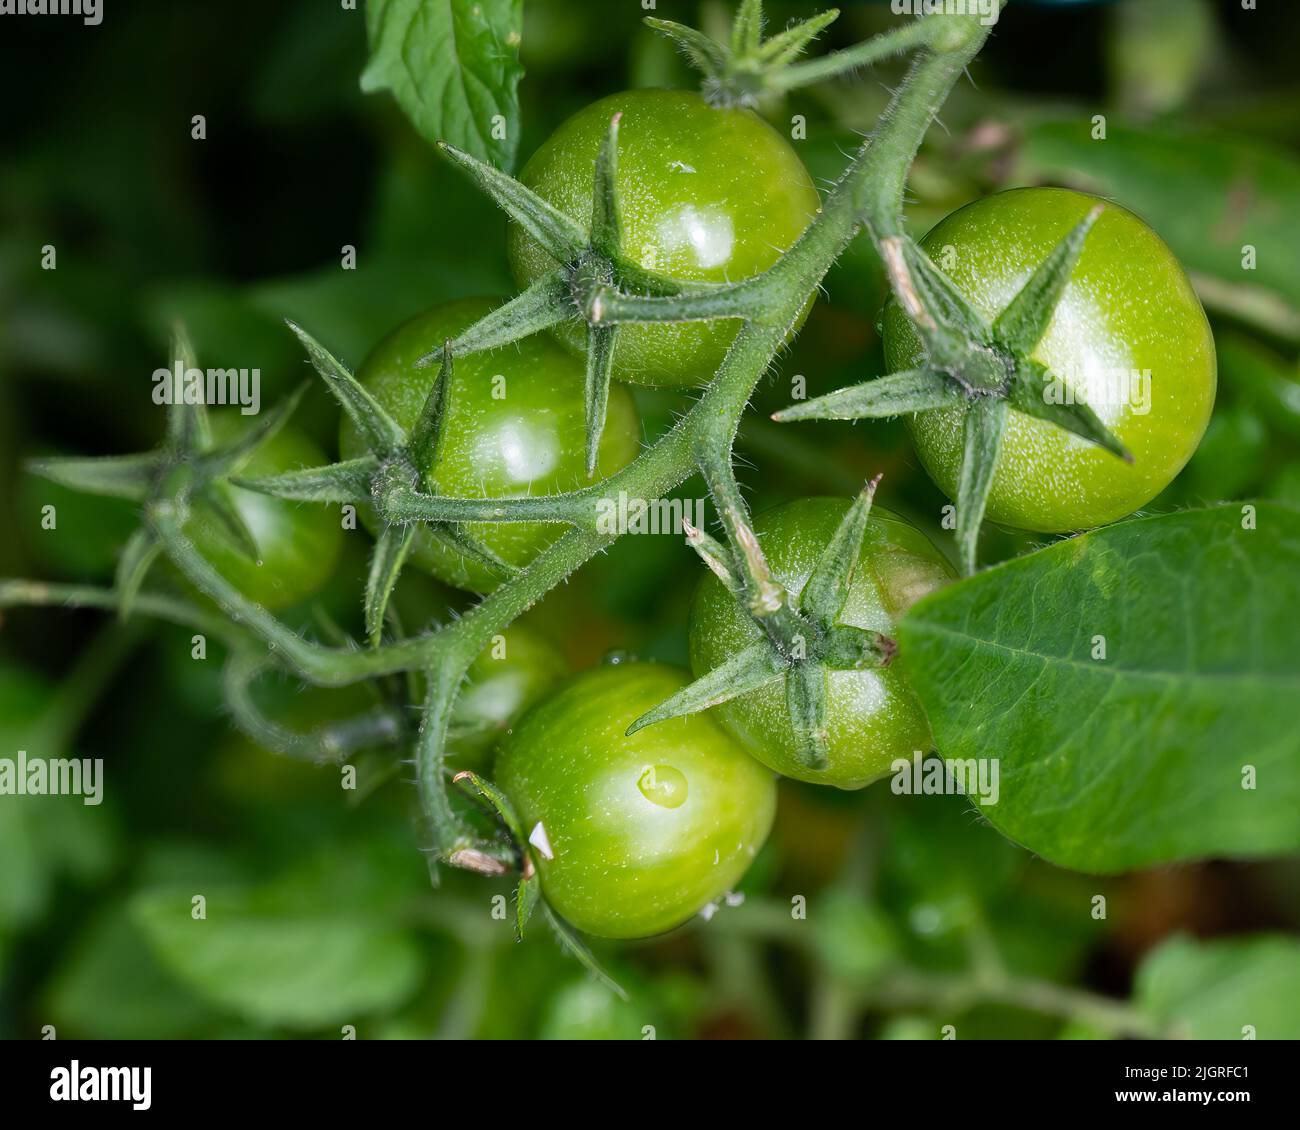 Green cherry tomatoes ripening on the vine in a garden Stock Photo